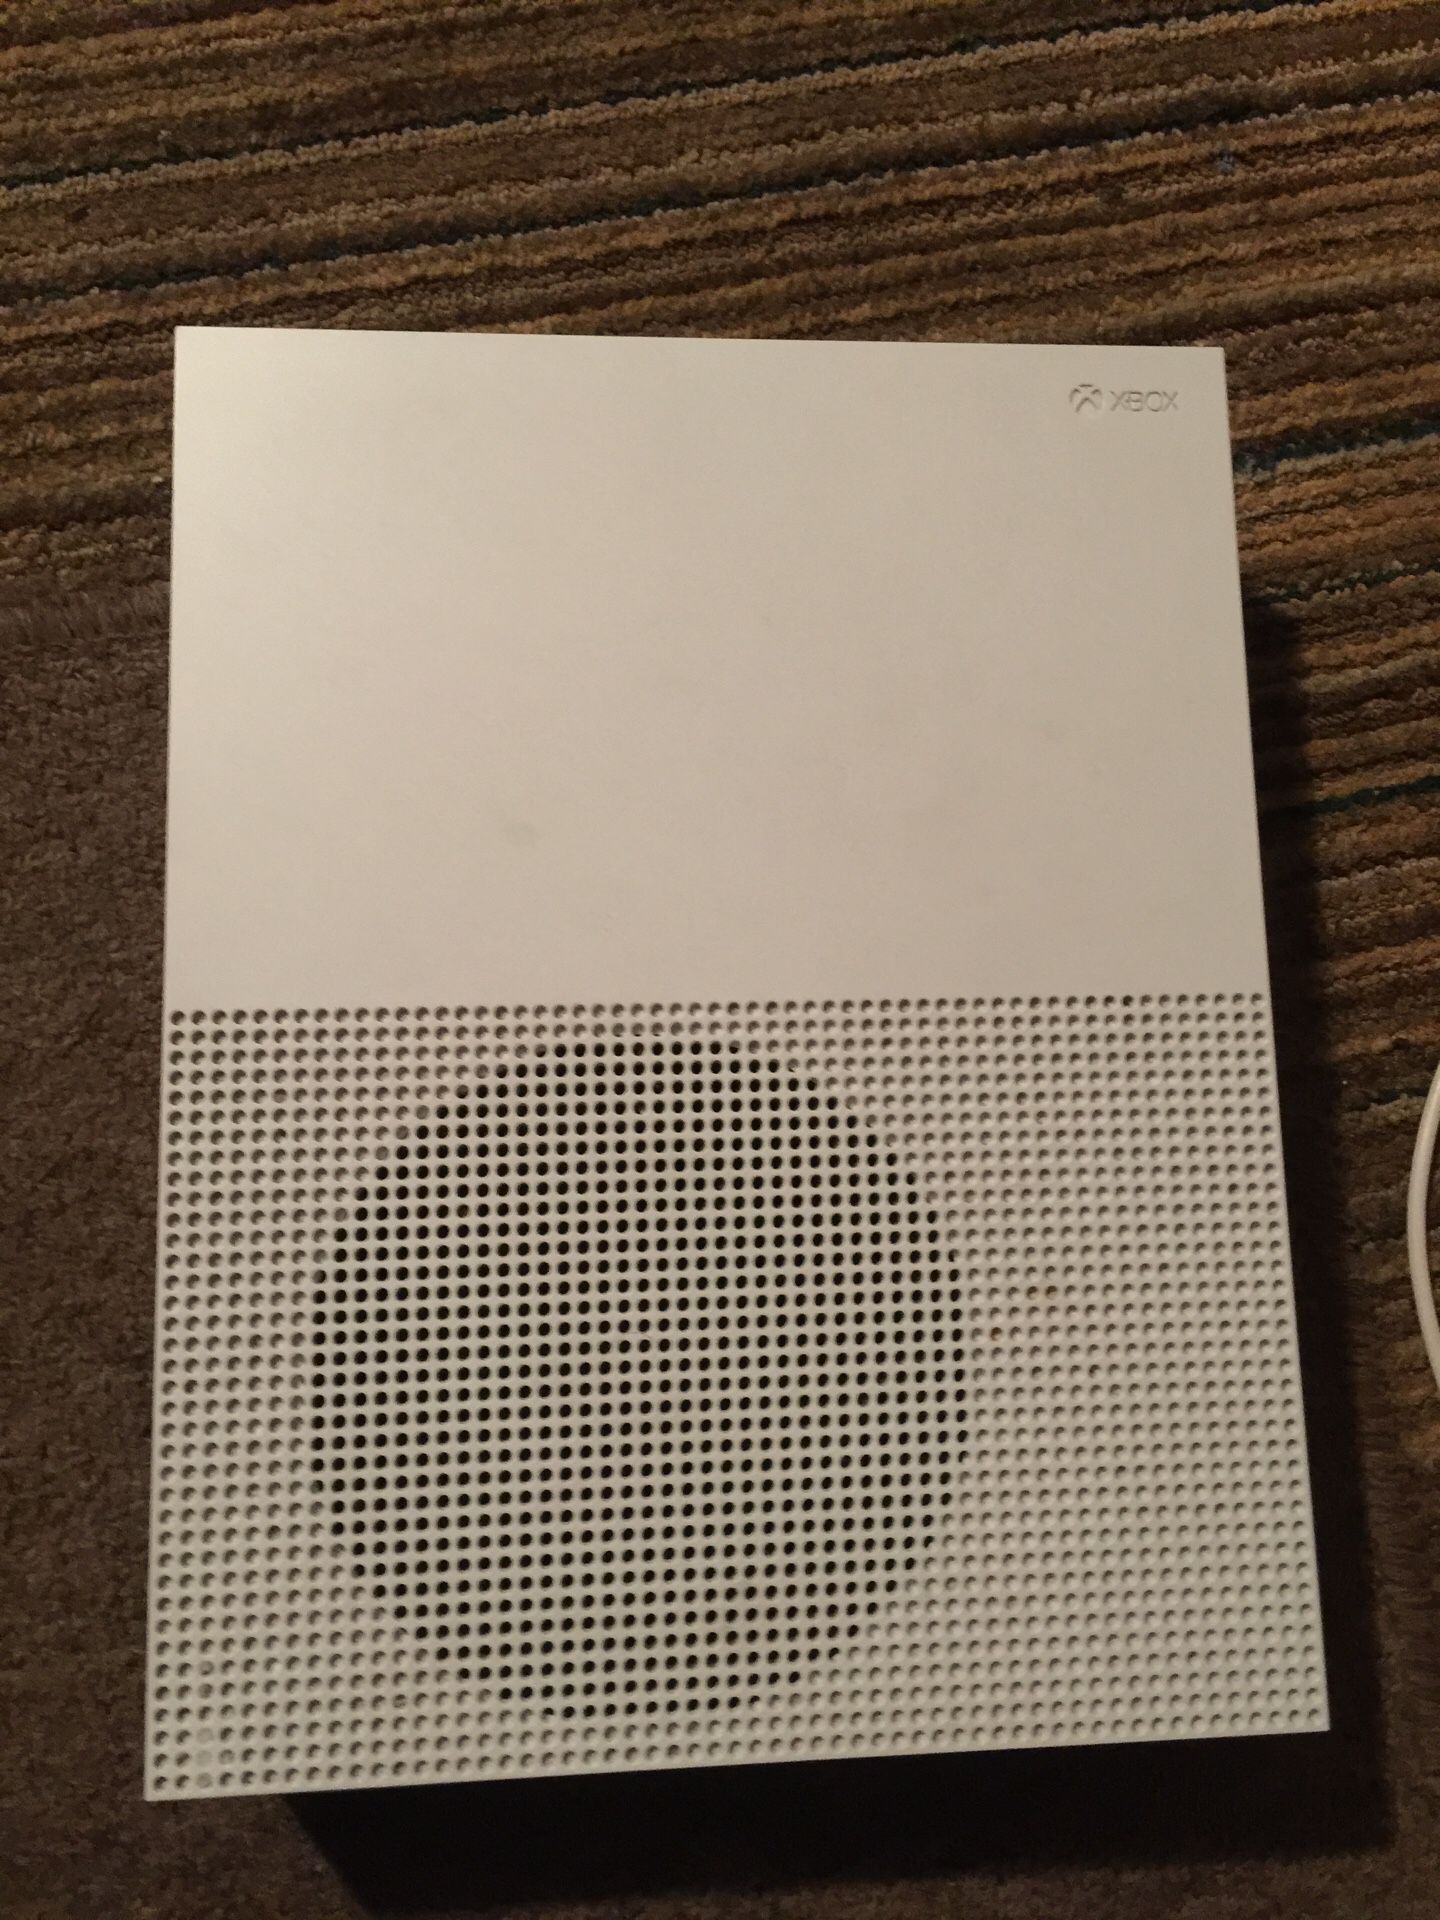 Xbox one s only use for 2 weeks with controller